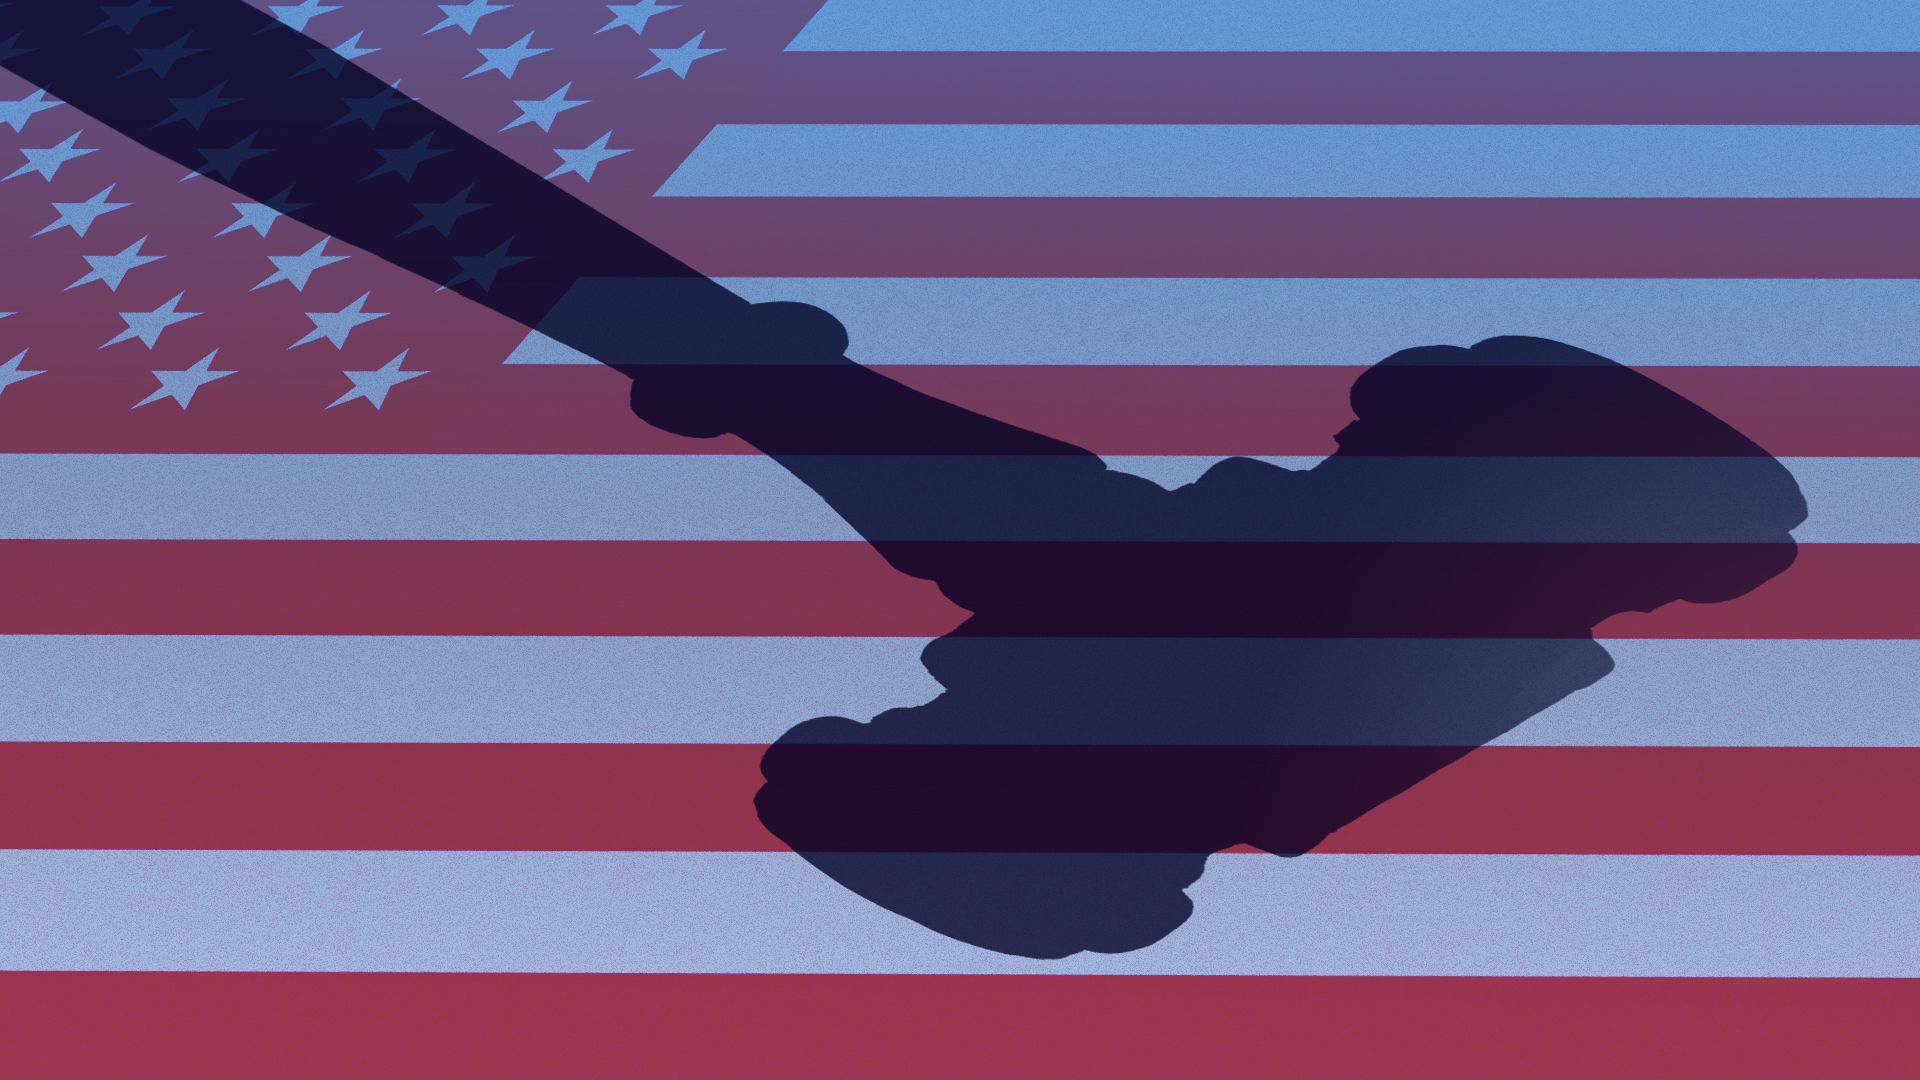 Illustration of the shadow of a gavel over an american flag